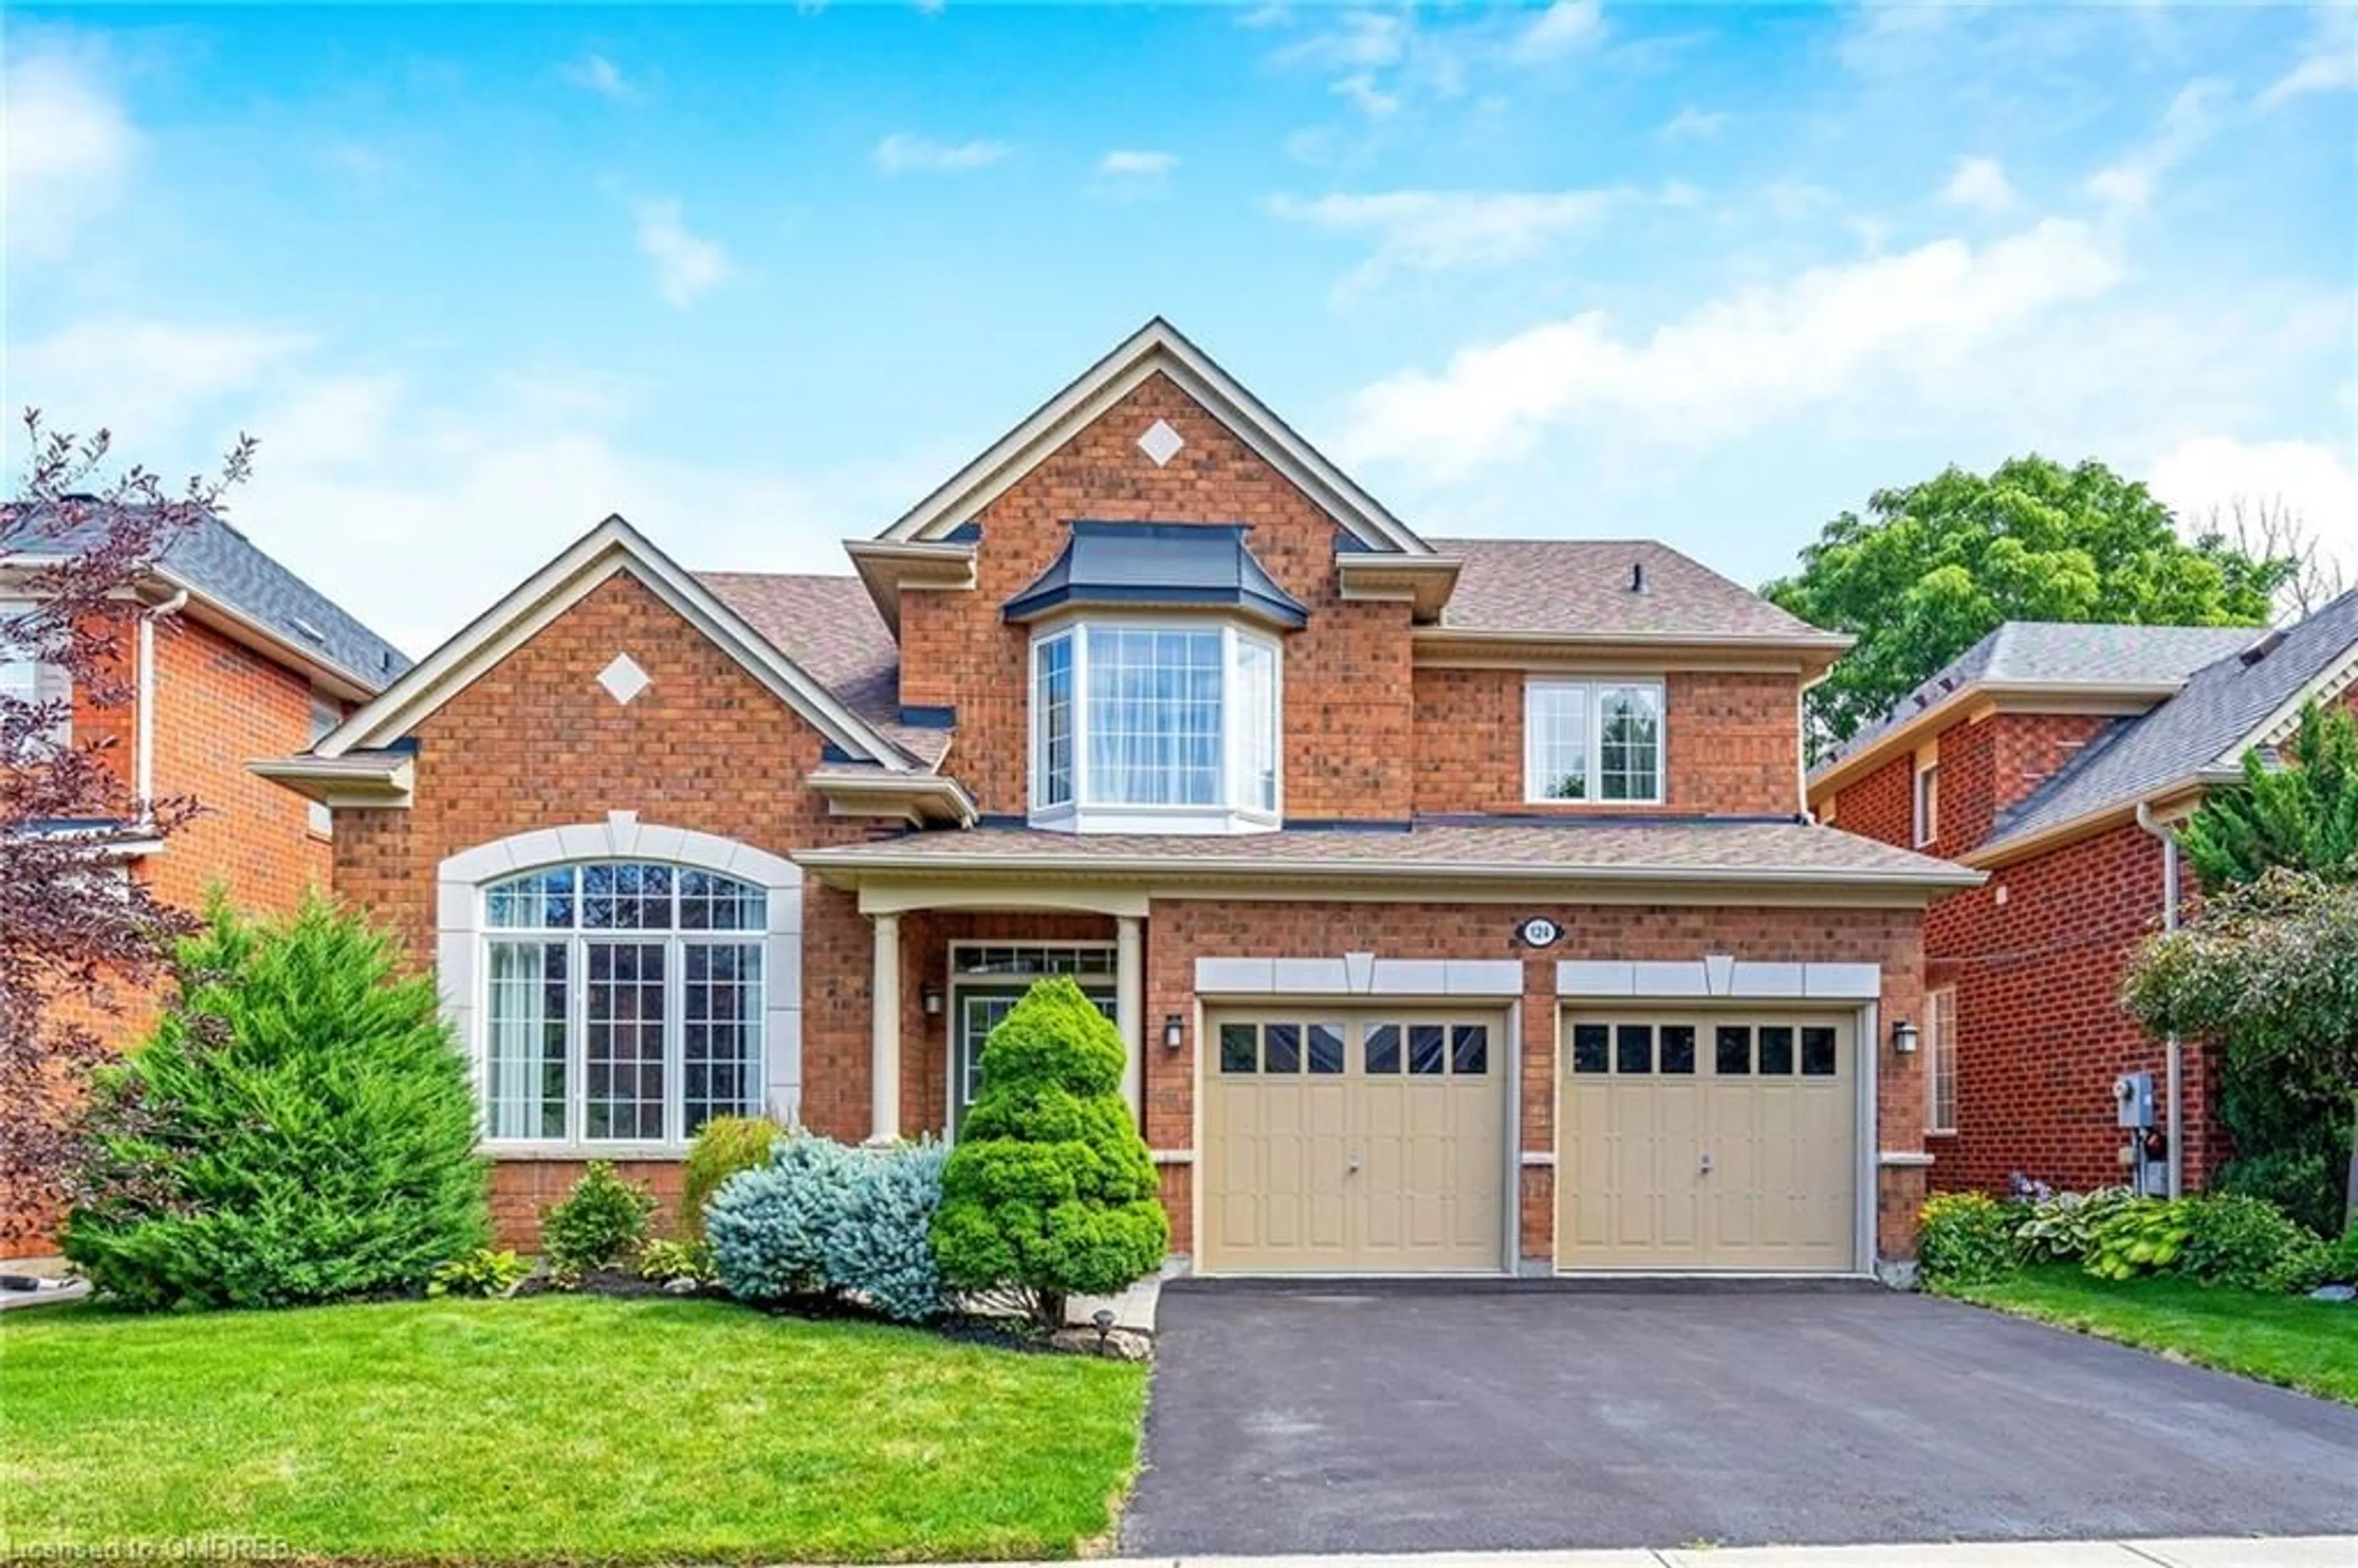 Home with brick exterior material for 124 Arborglen Dr, Georgetown Ontario L7G 6L1